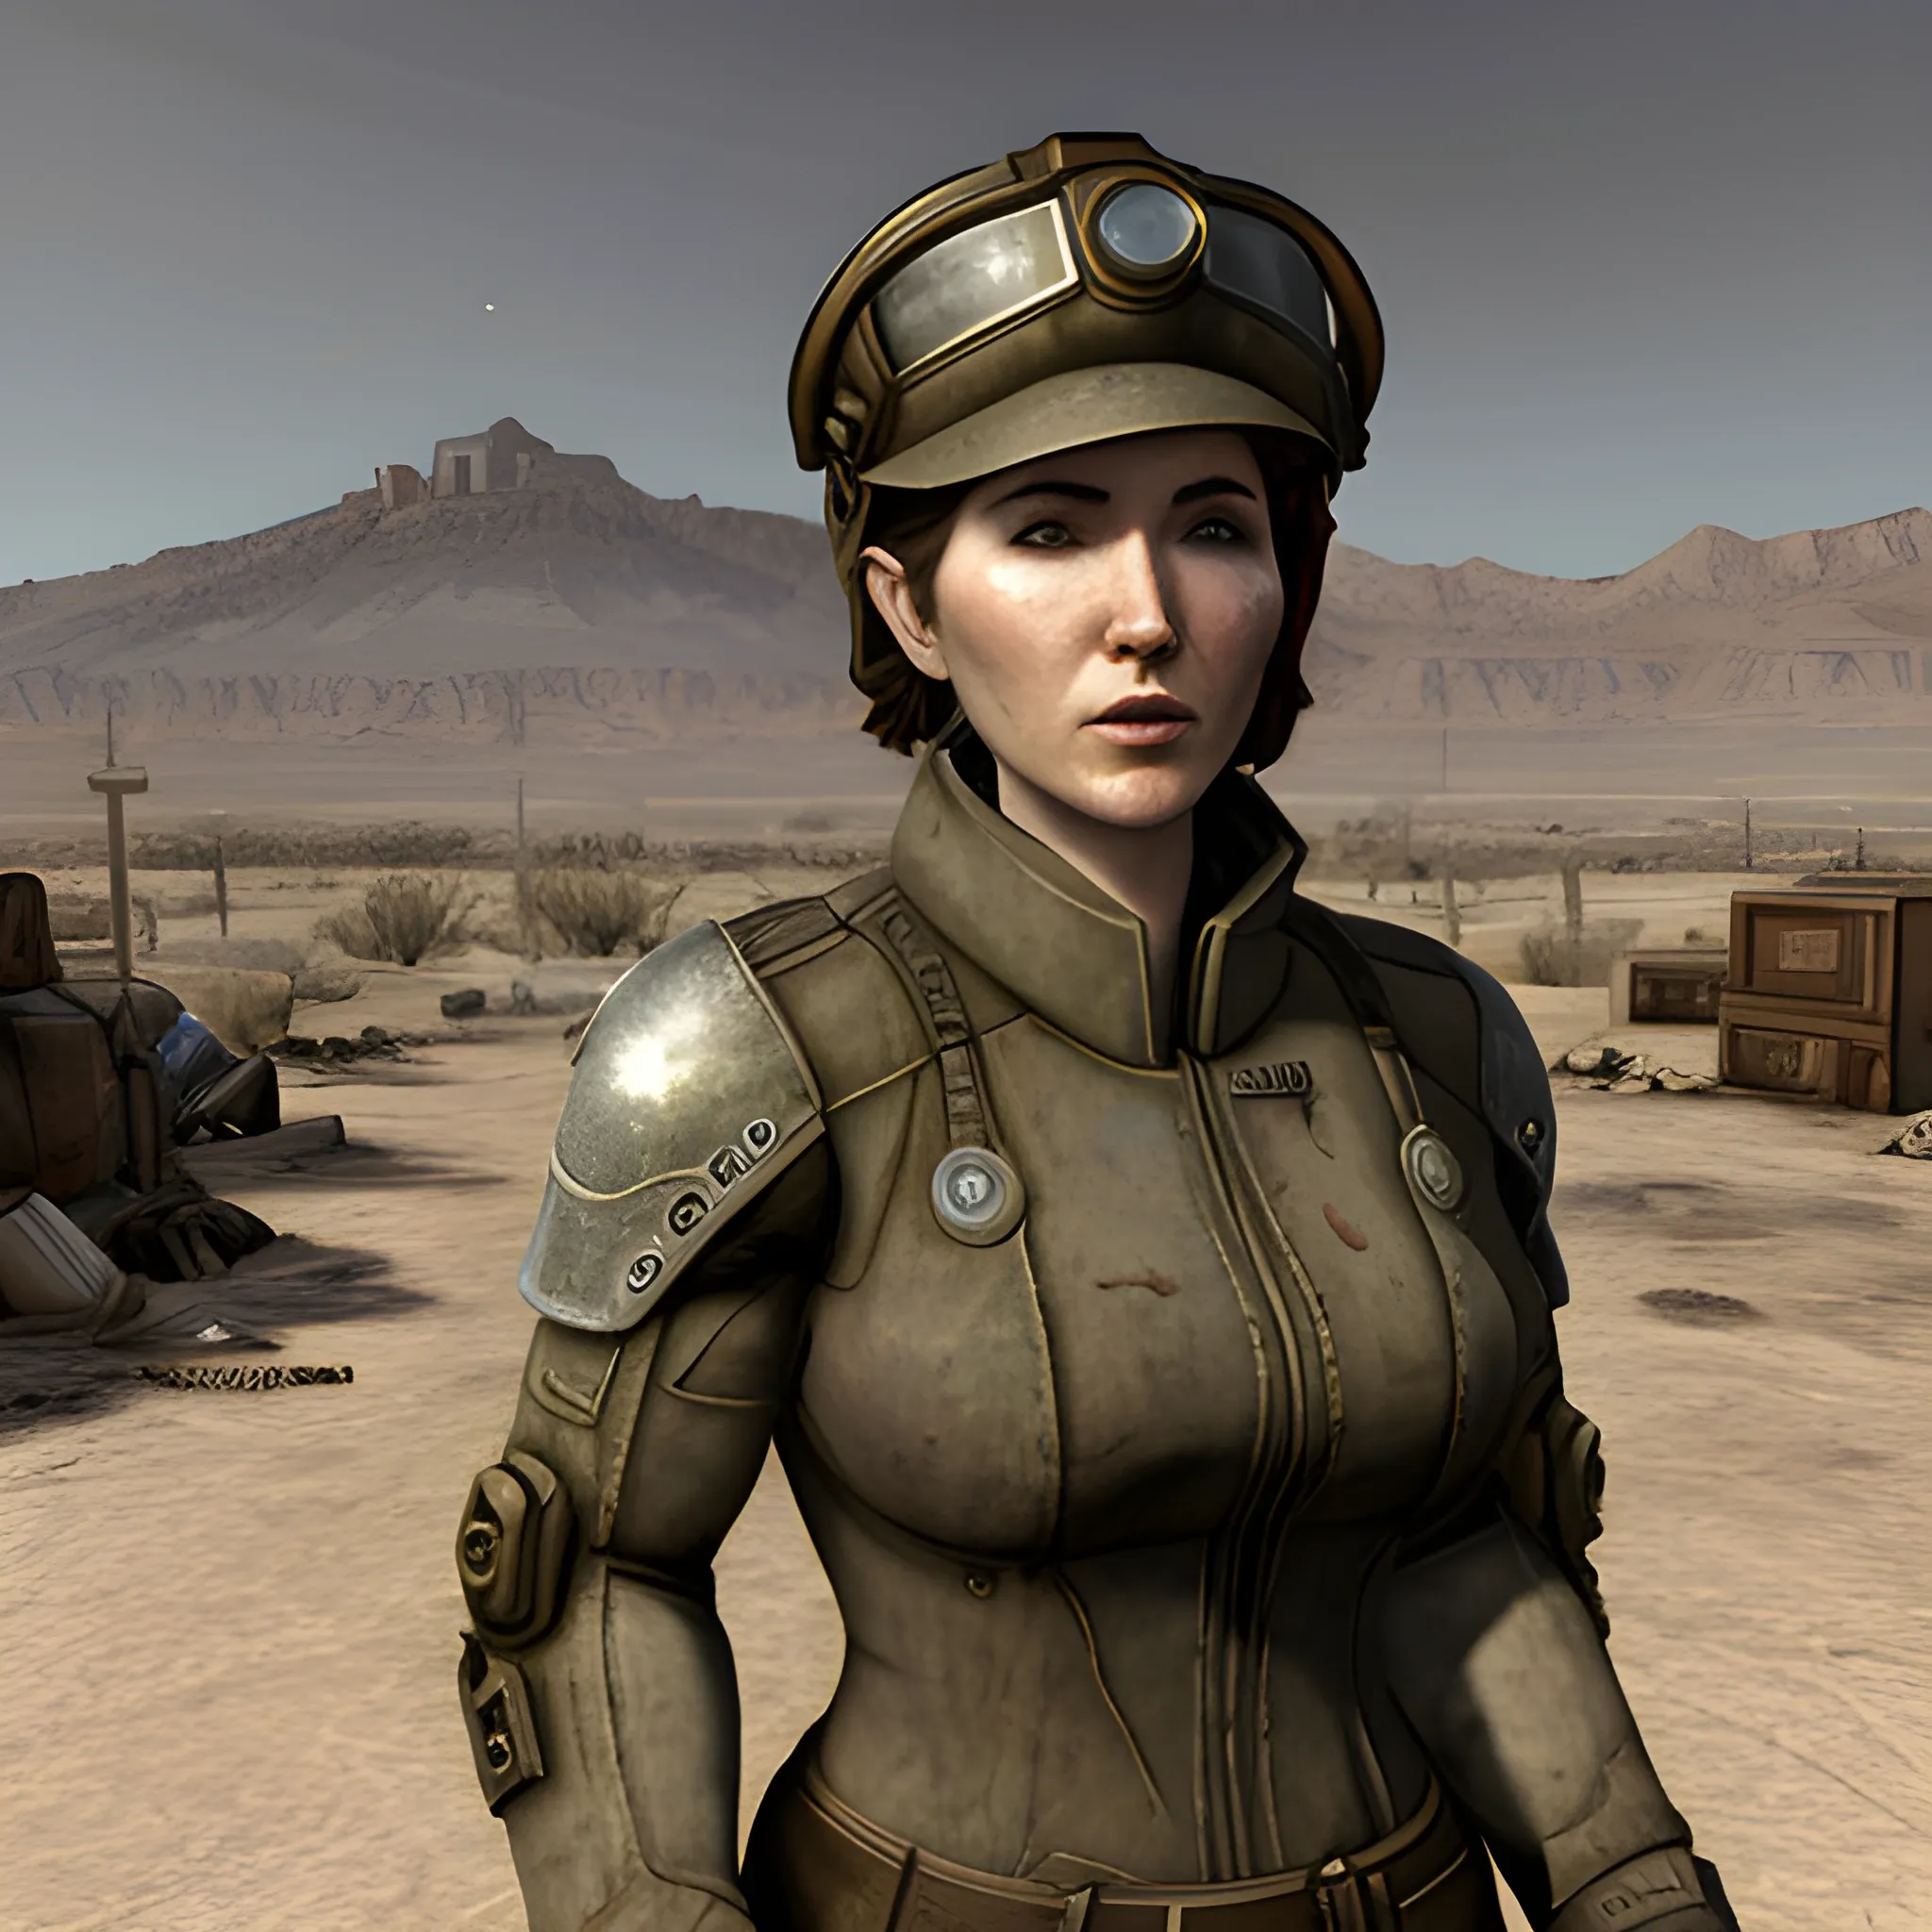 In the style of Fallout New Vegas, masterpiece, Jewel Staite as a Brotherhood of Steel Scribe with a dirty face and tilted cap